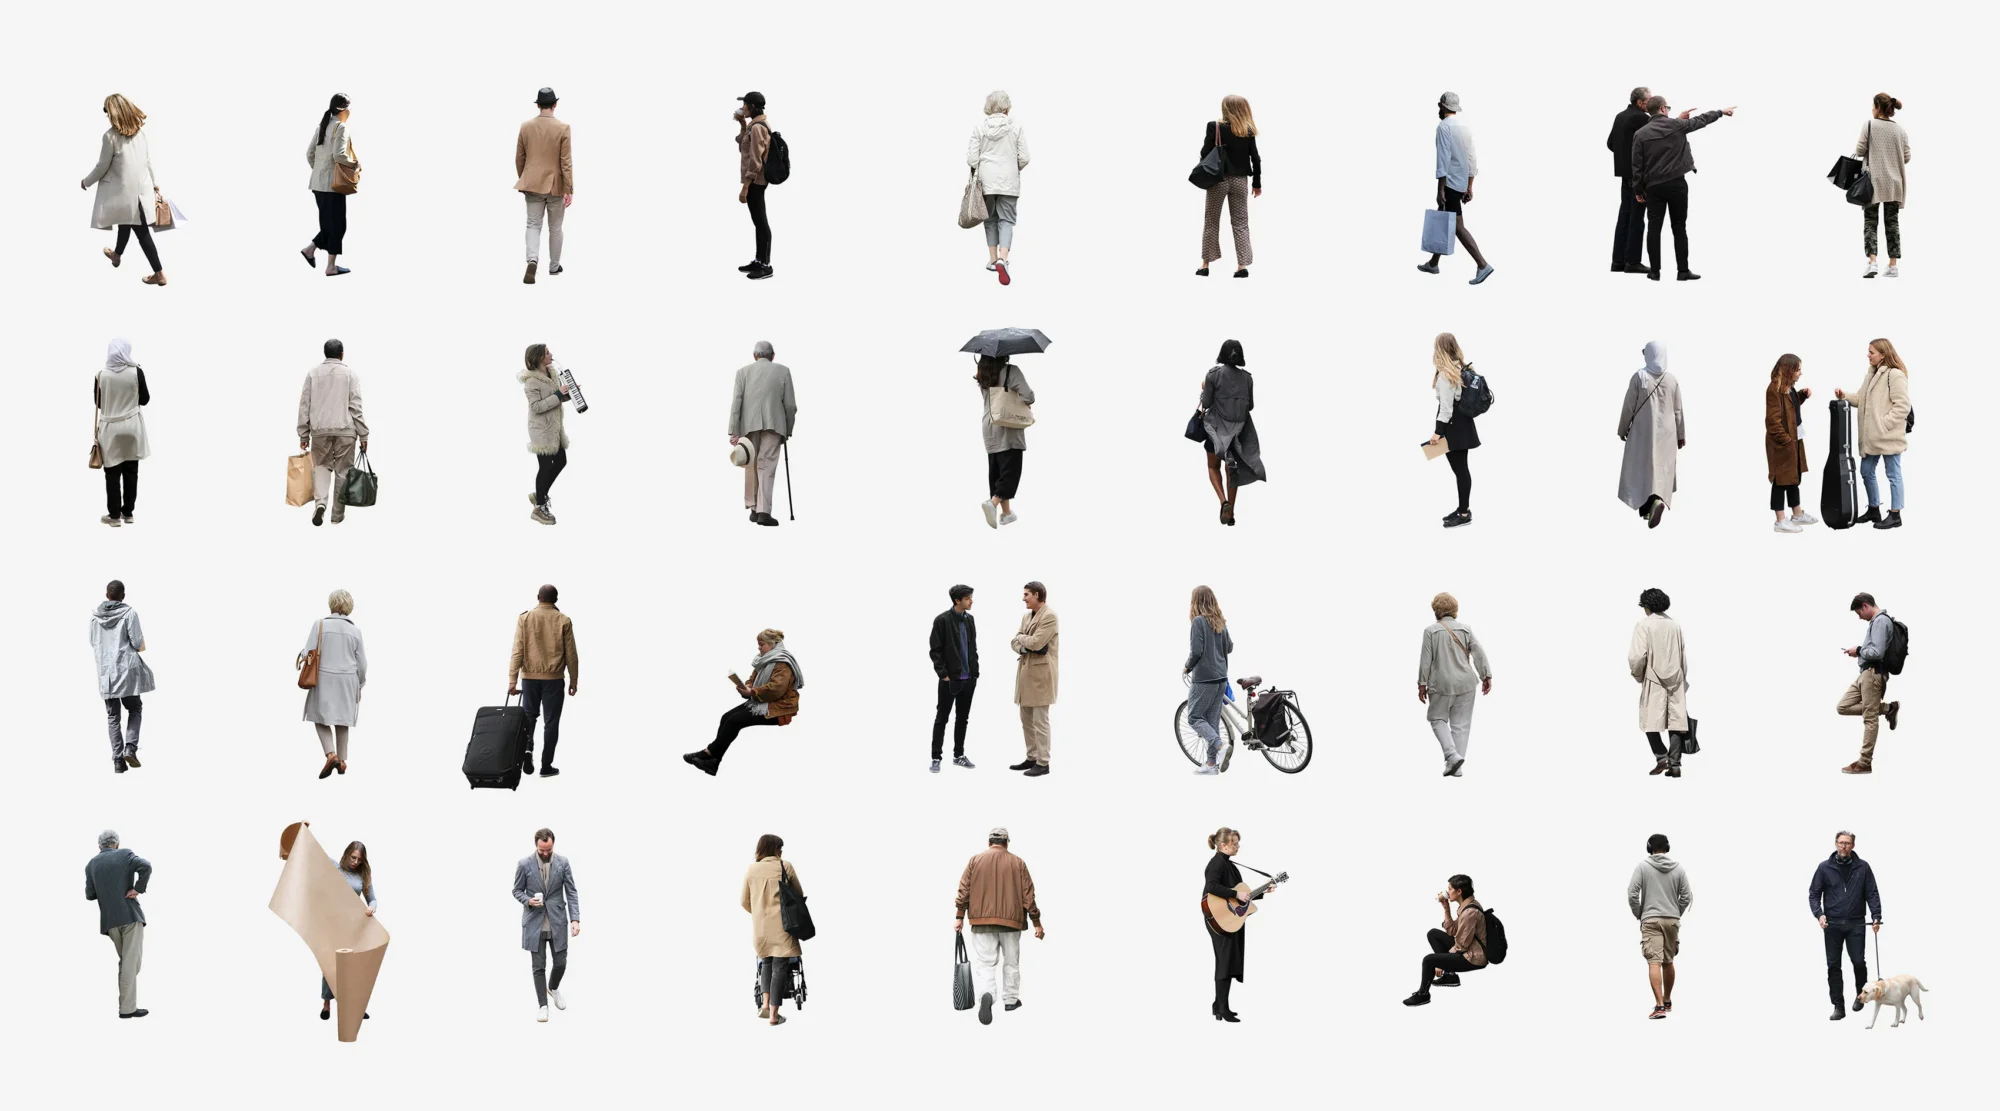 Studio Esinam - Large Collection of 2D Cutout People